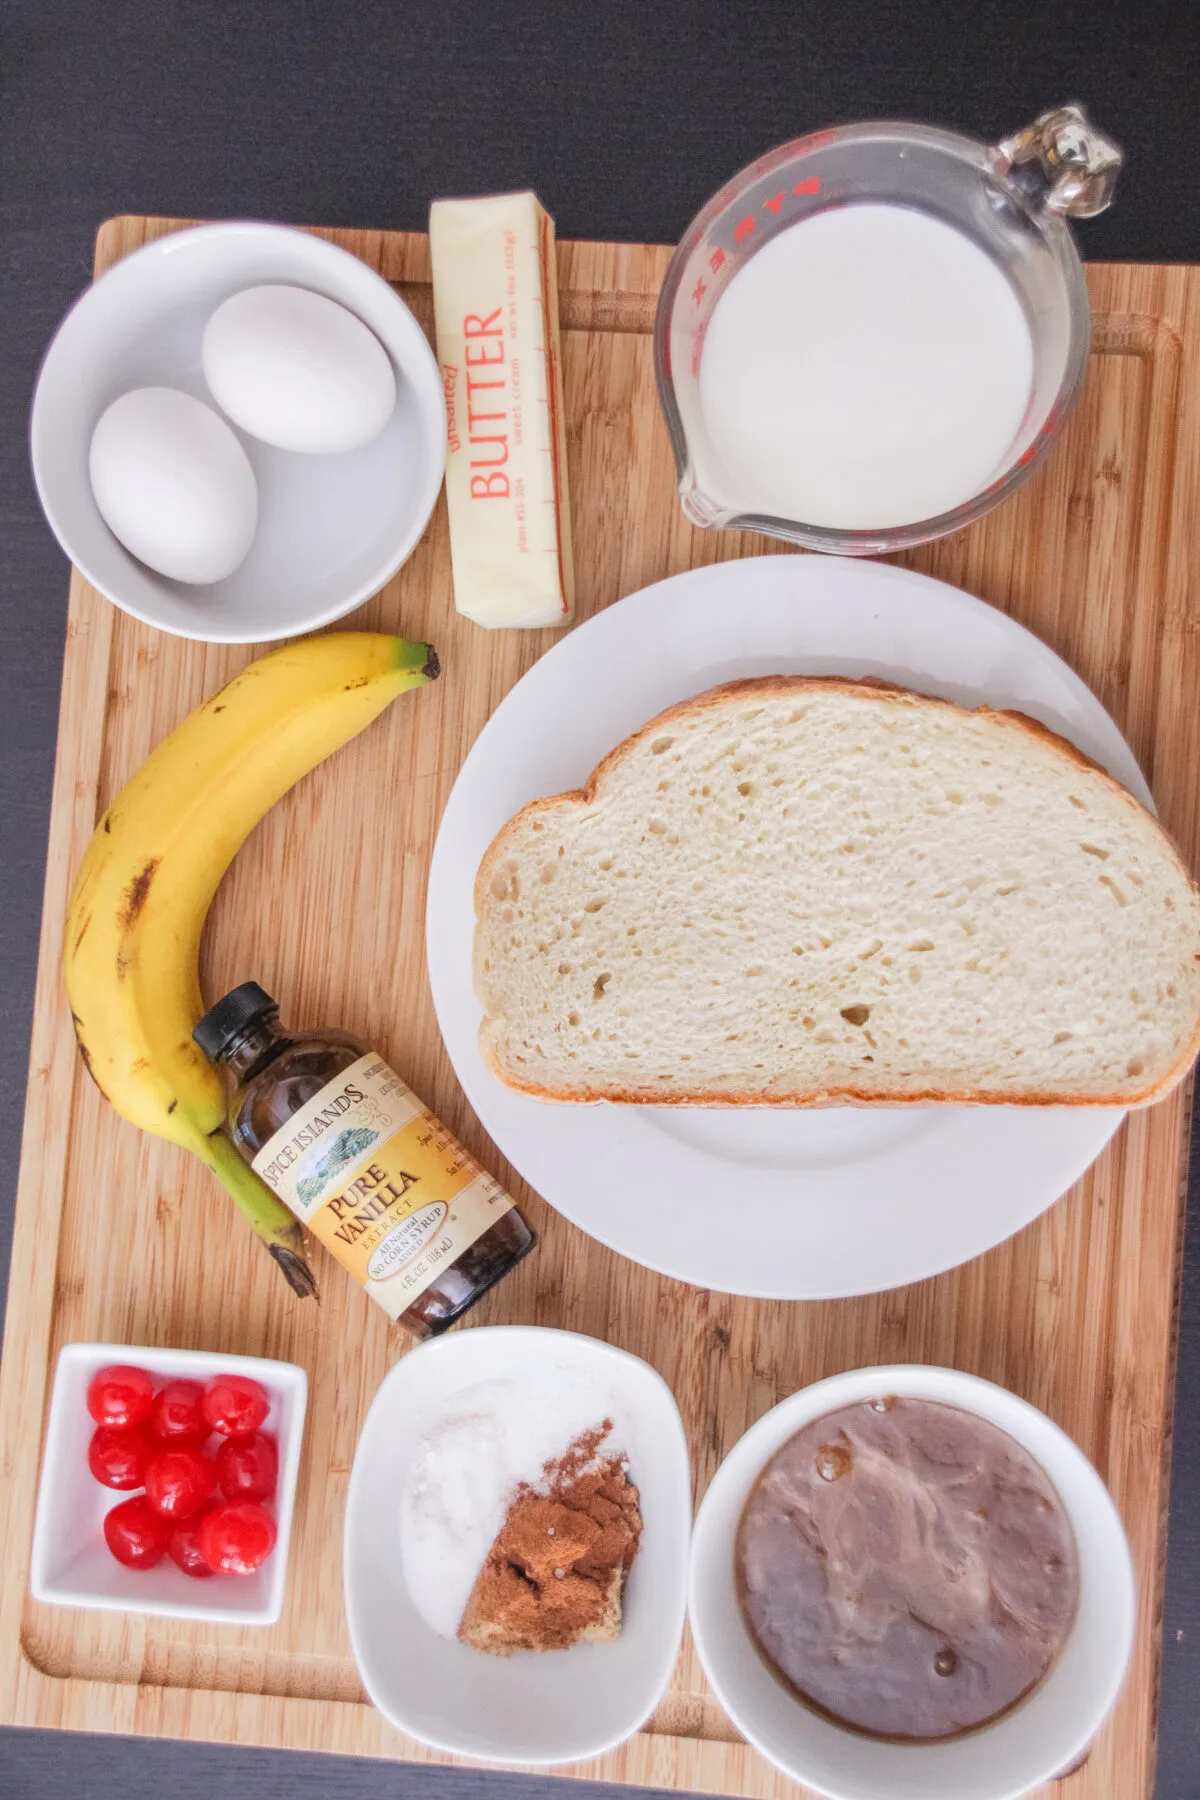 Ingredients for Banana's foster french toast.